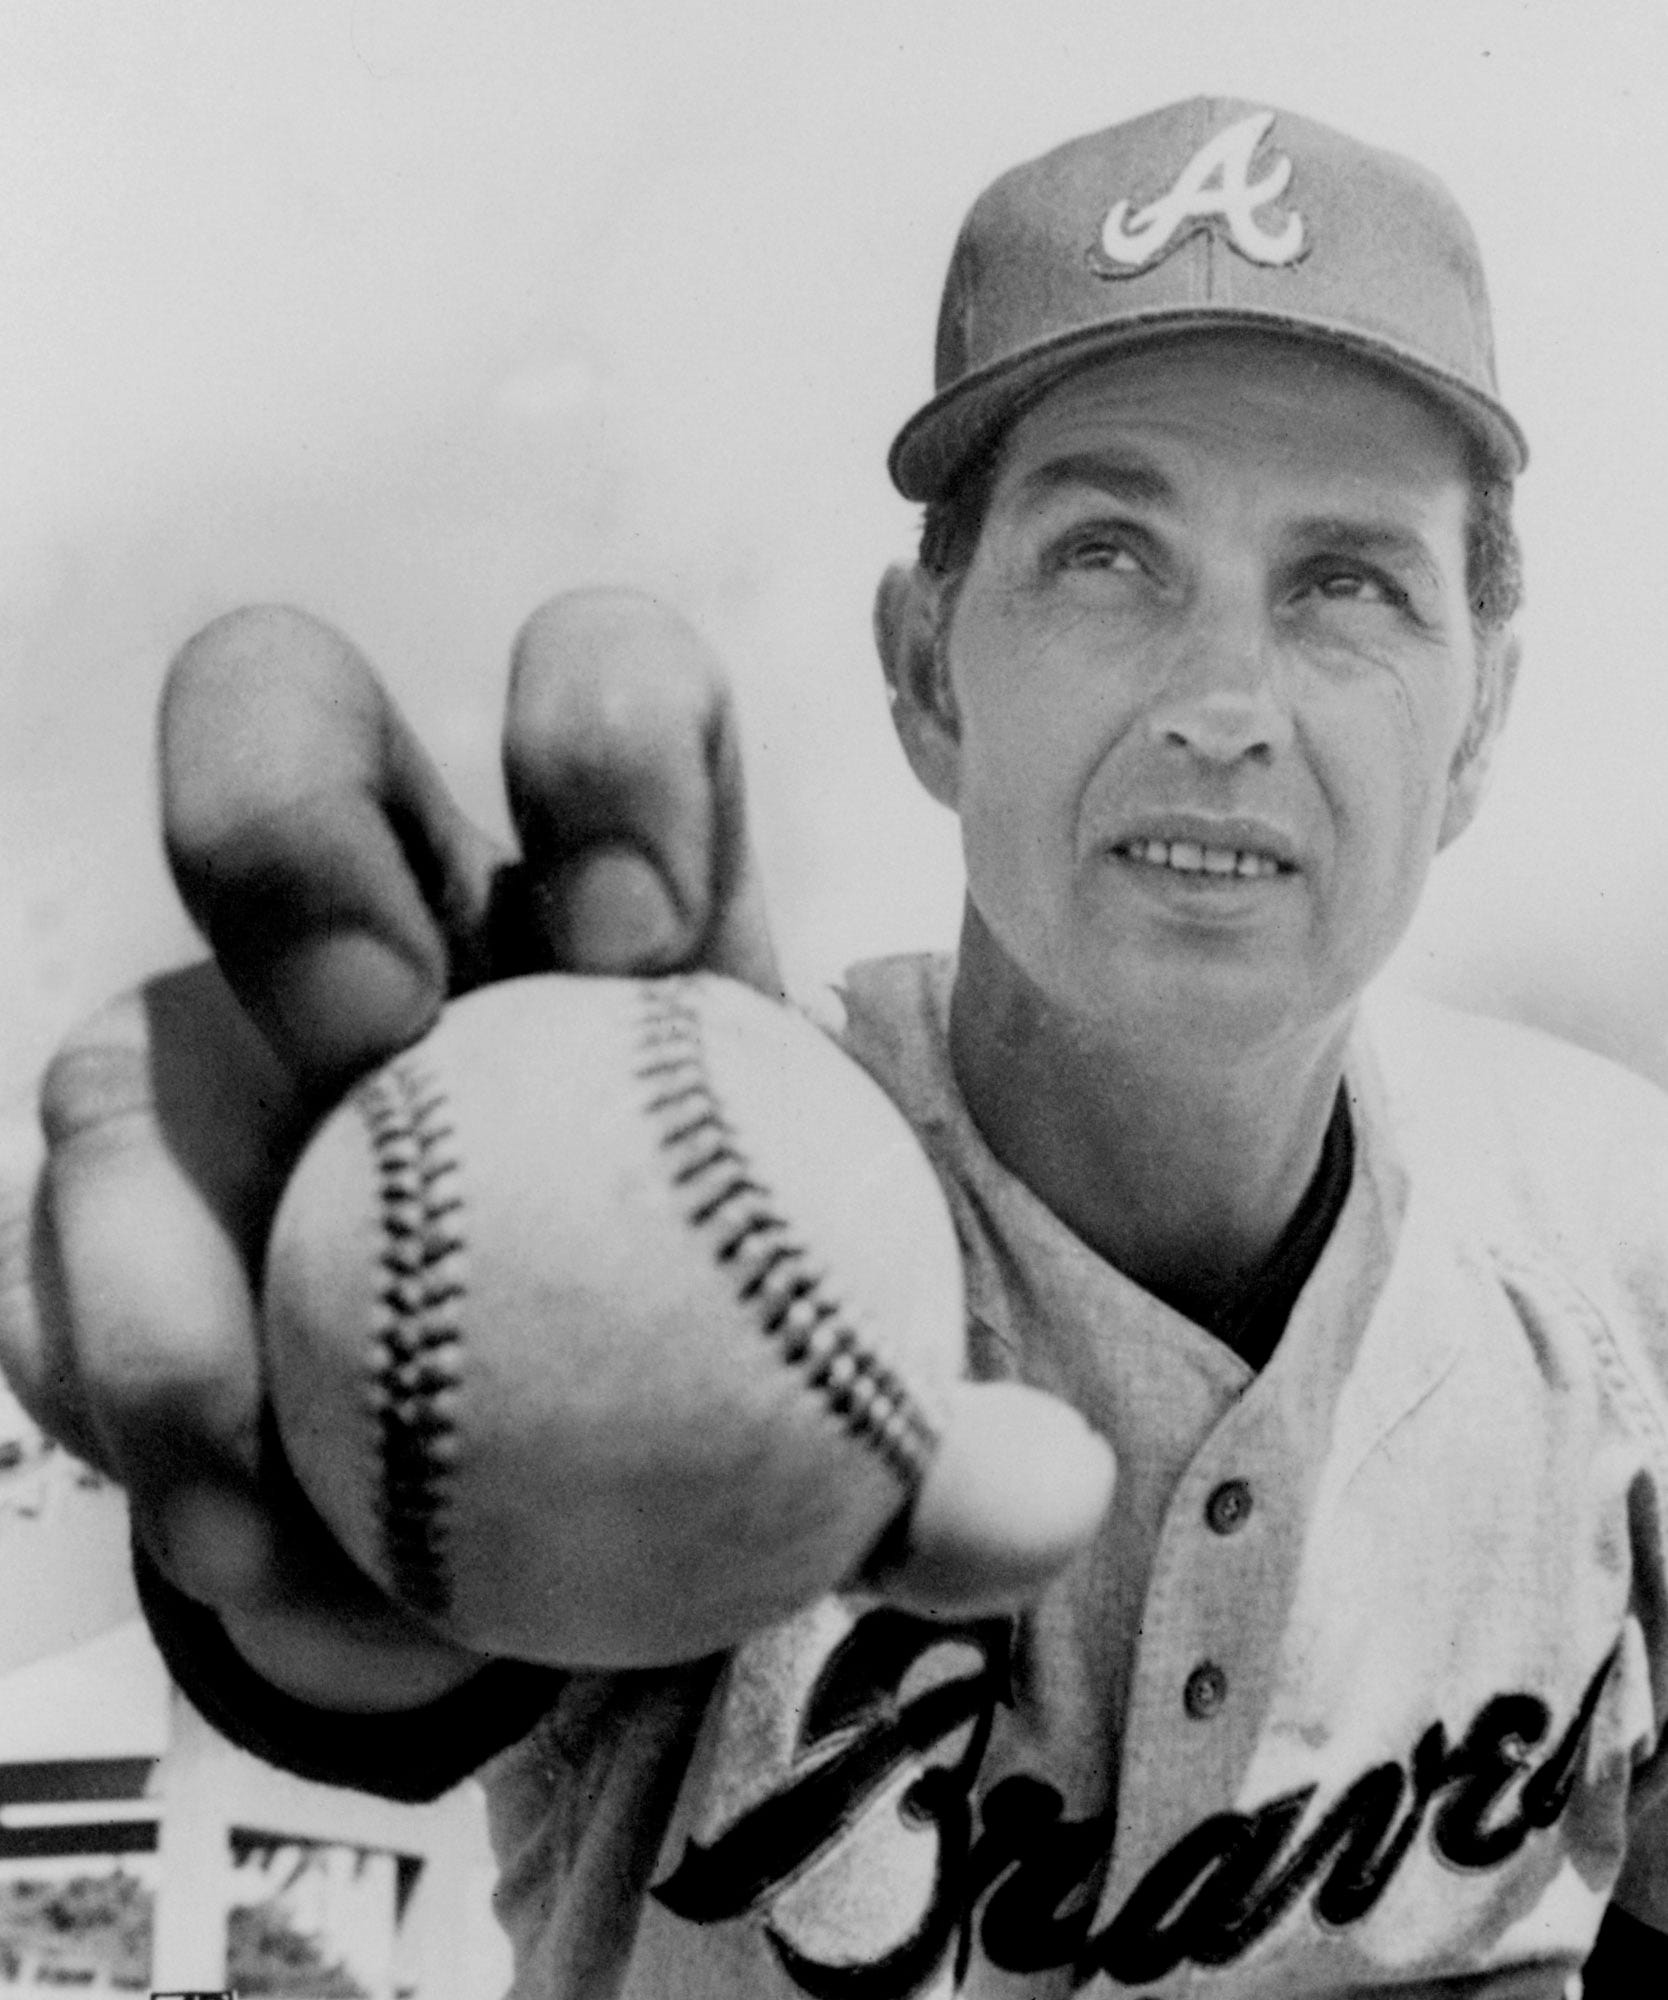 Hoyt Wilhelm, pictured in 1970 with the Atlanta Braves